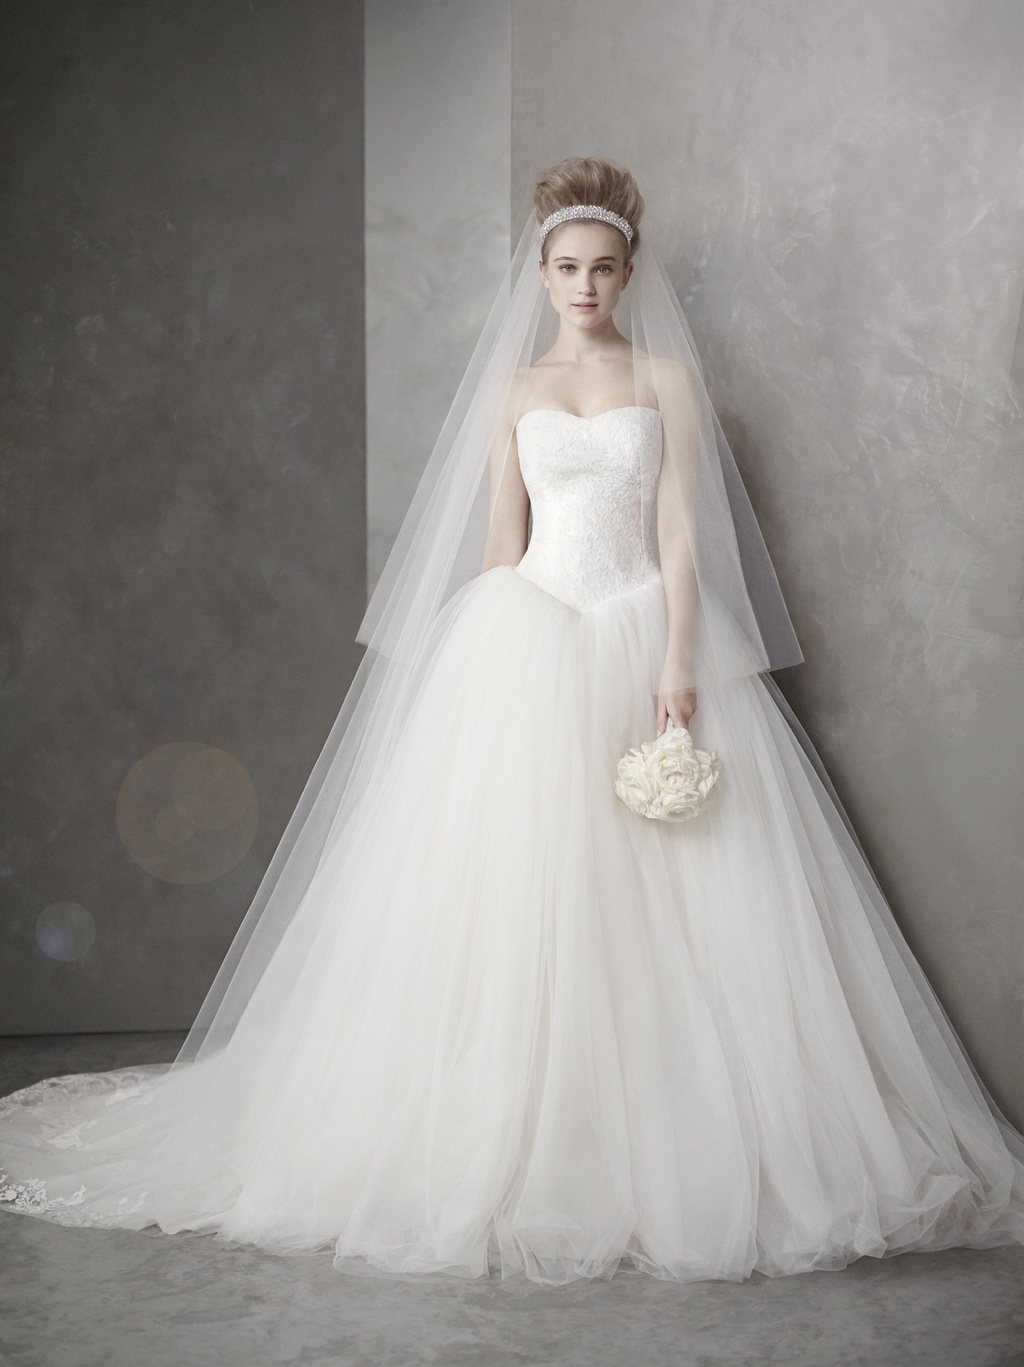 white-by-vera-wang-wedding-dresses-spring-2012-bridal-gown-fairytale-ballgown.full